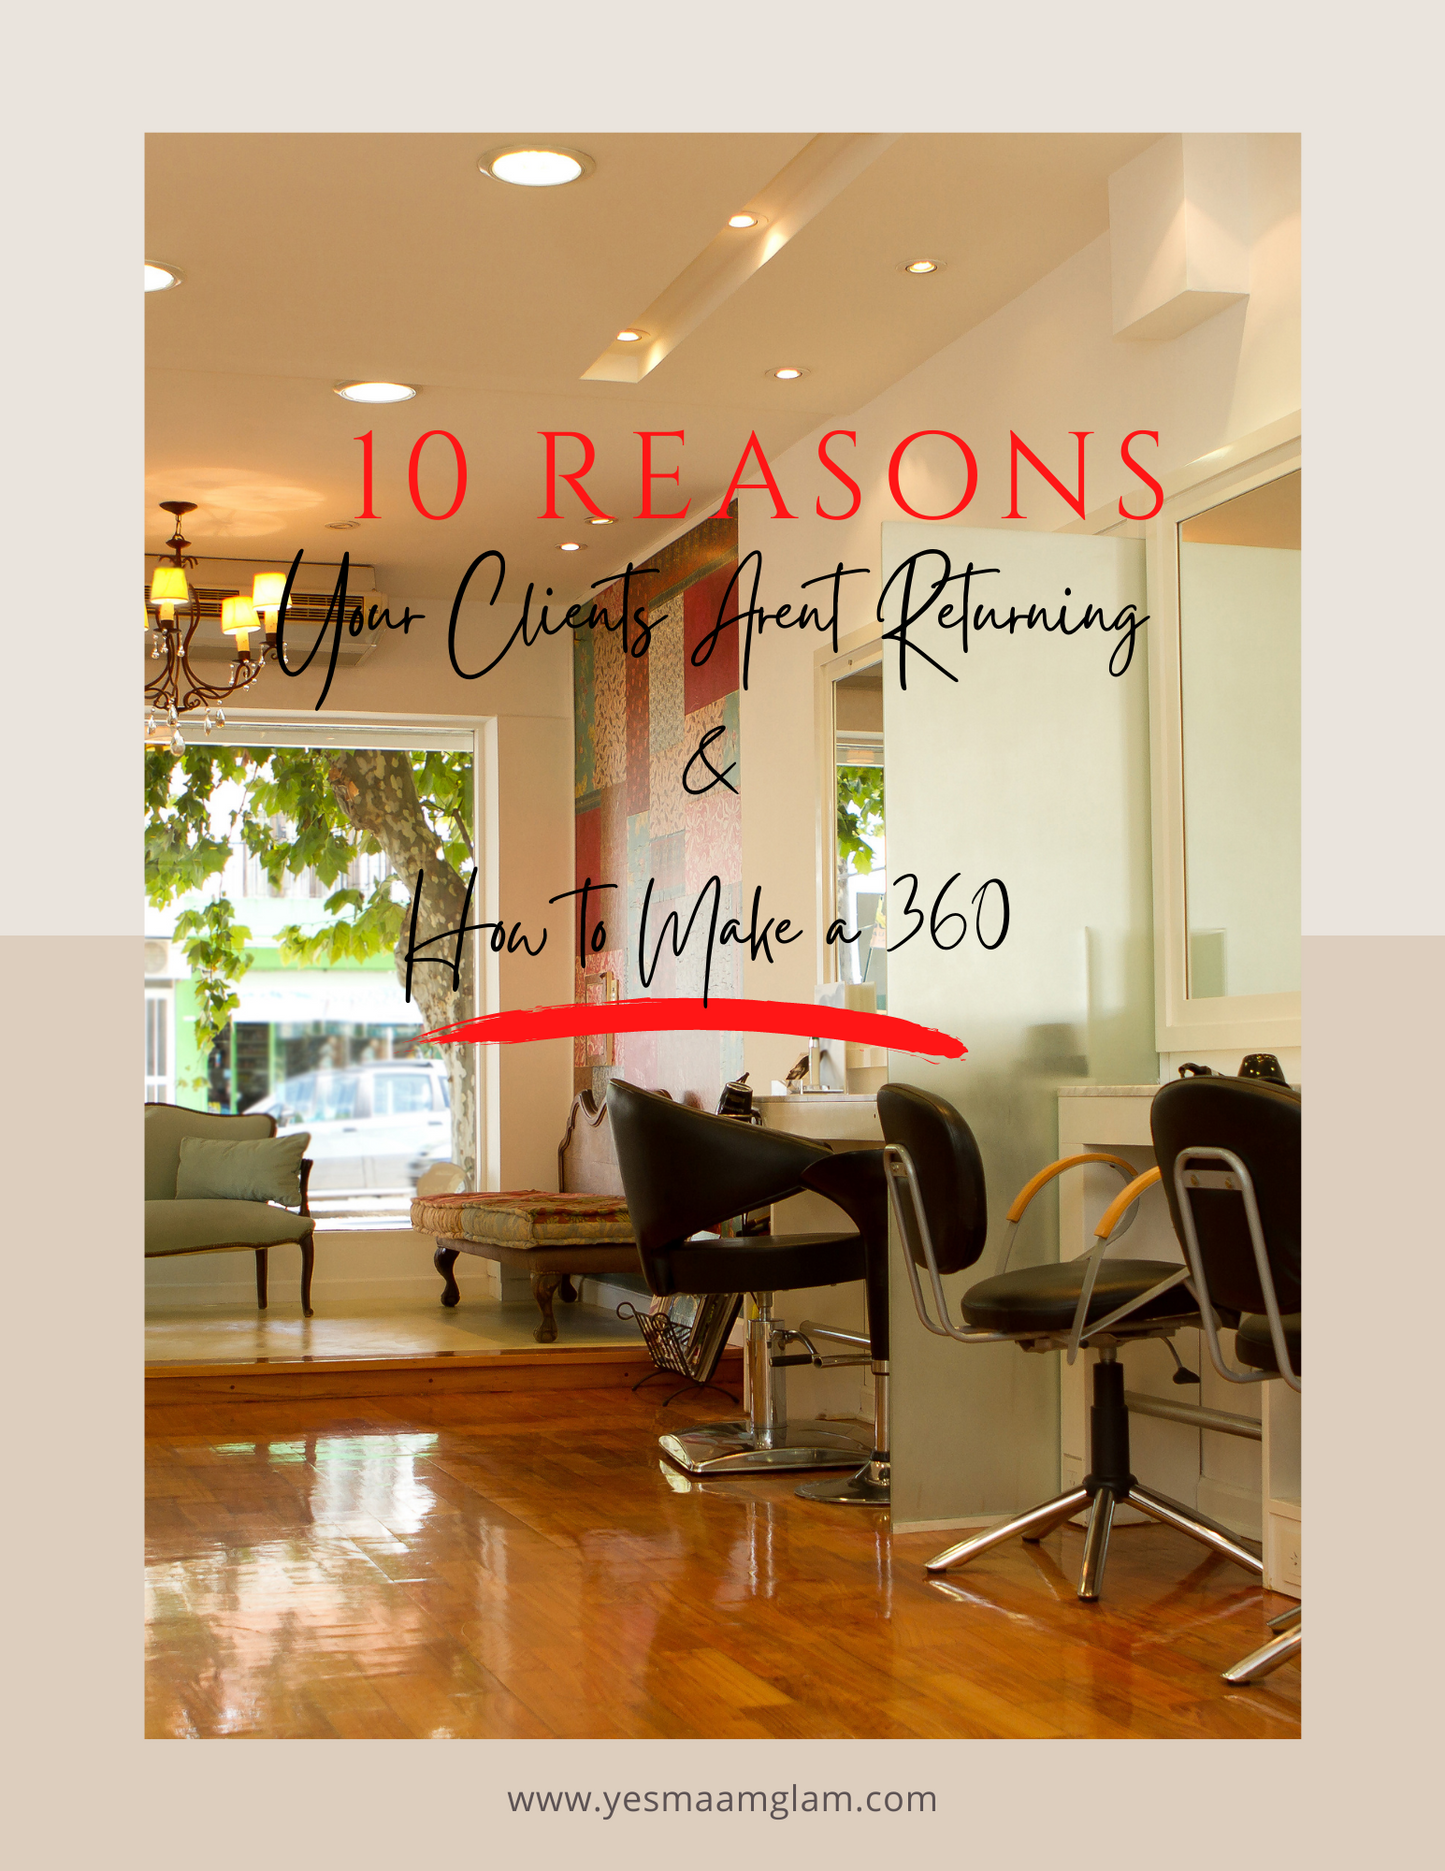 10 Reasons Your Clients Aren't Returning & How to Make a 360